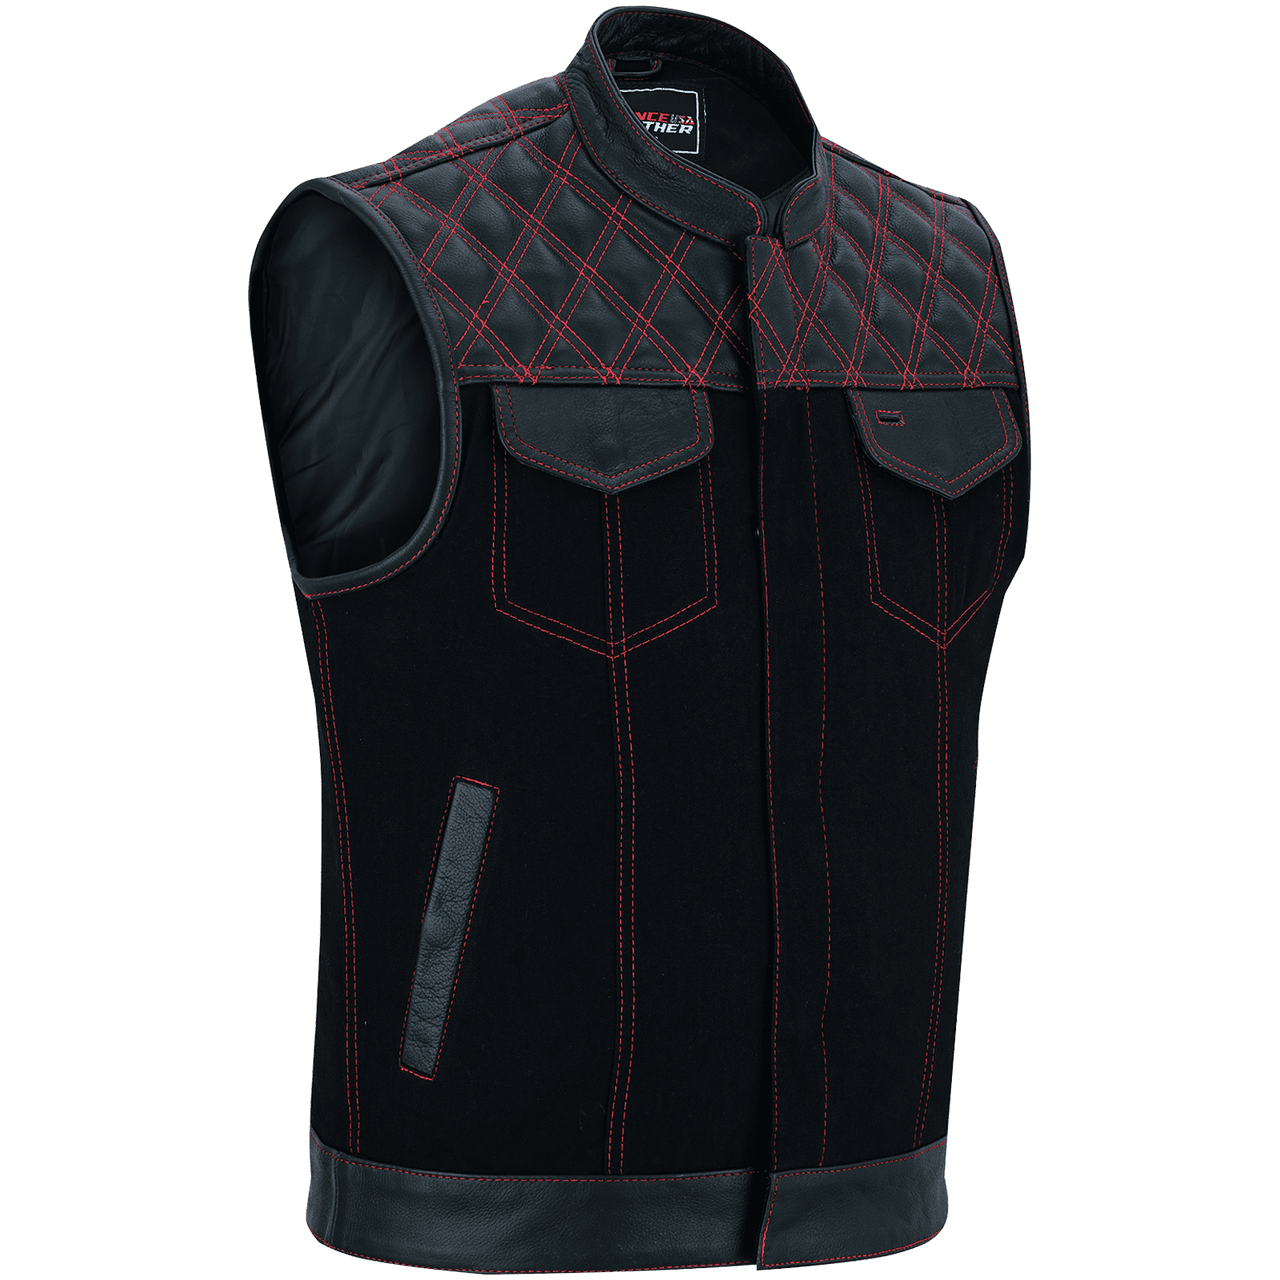 Vance-Leathers-VB924RD-Men's-Denim-Leather-Motorcycle-Vest-with-Red-Stitching-main